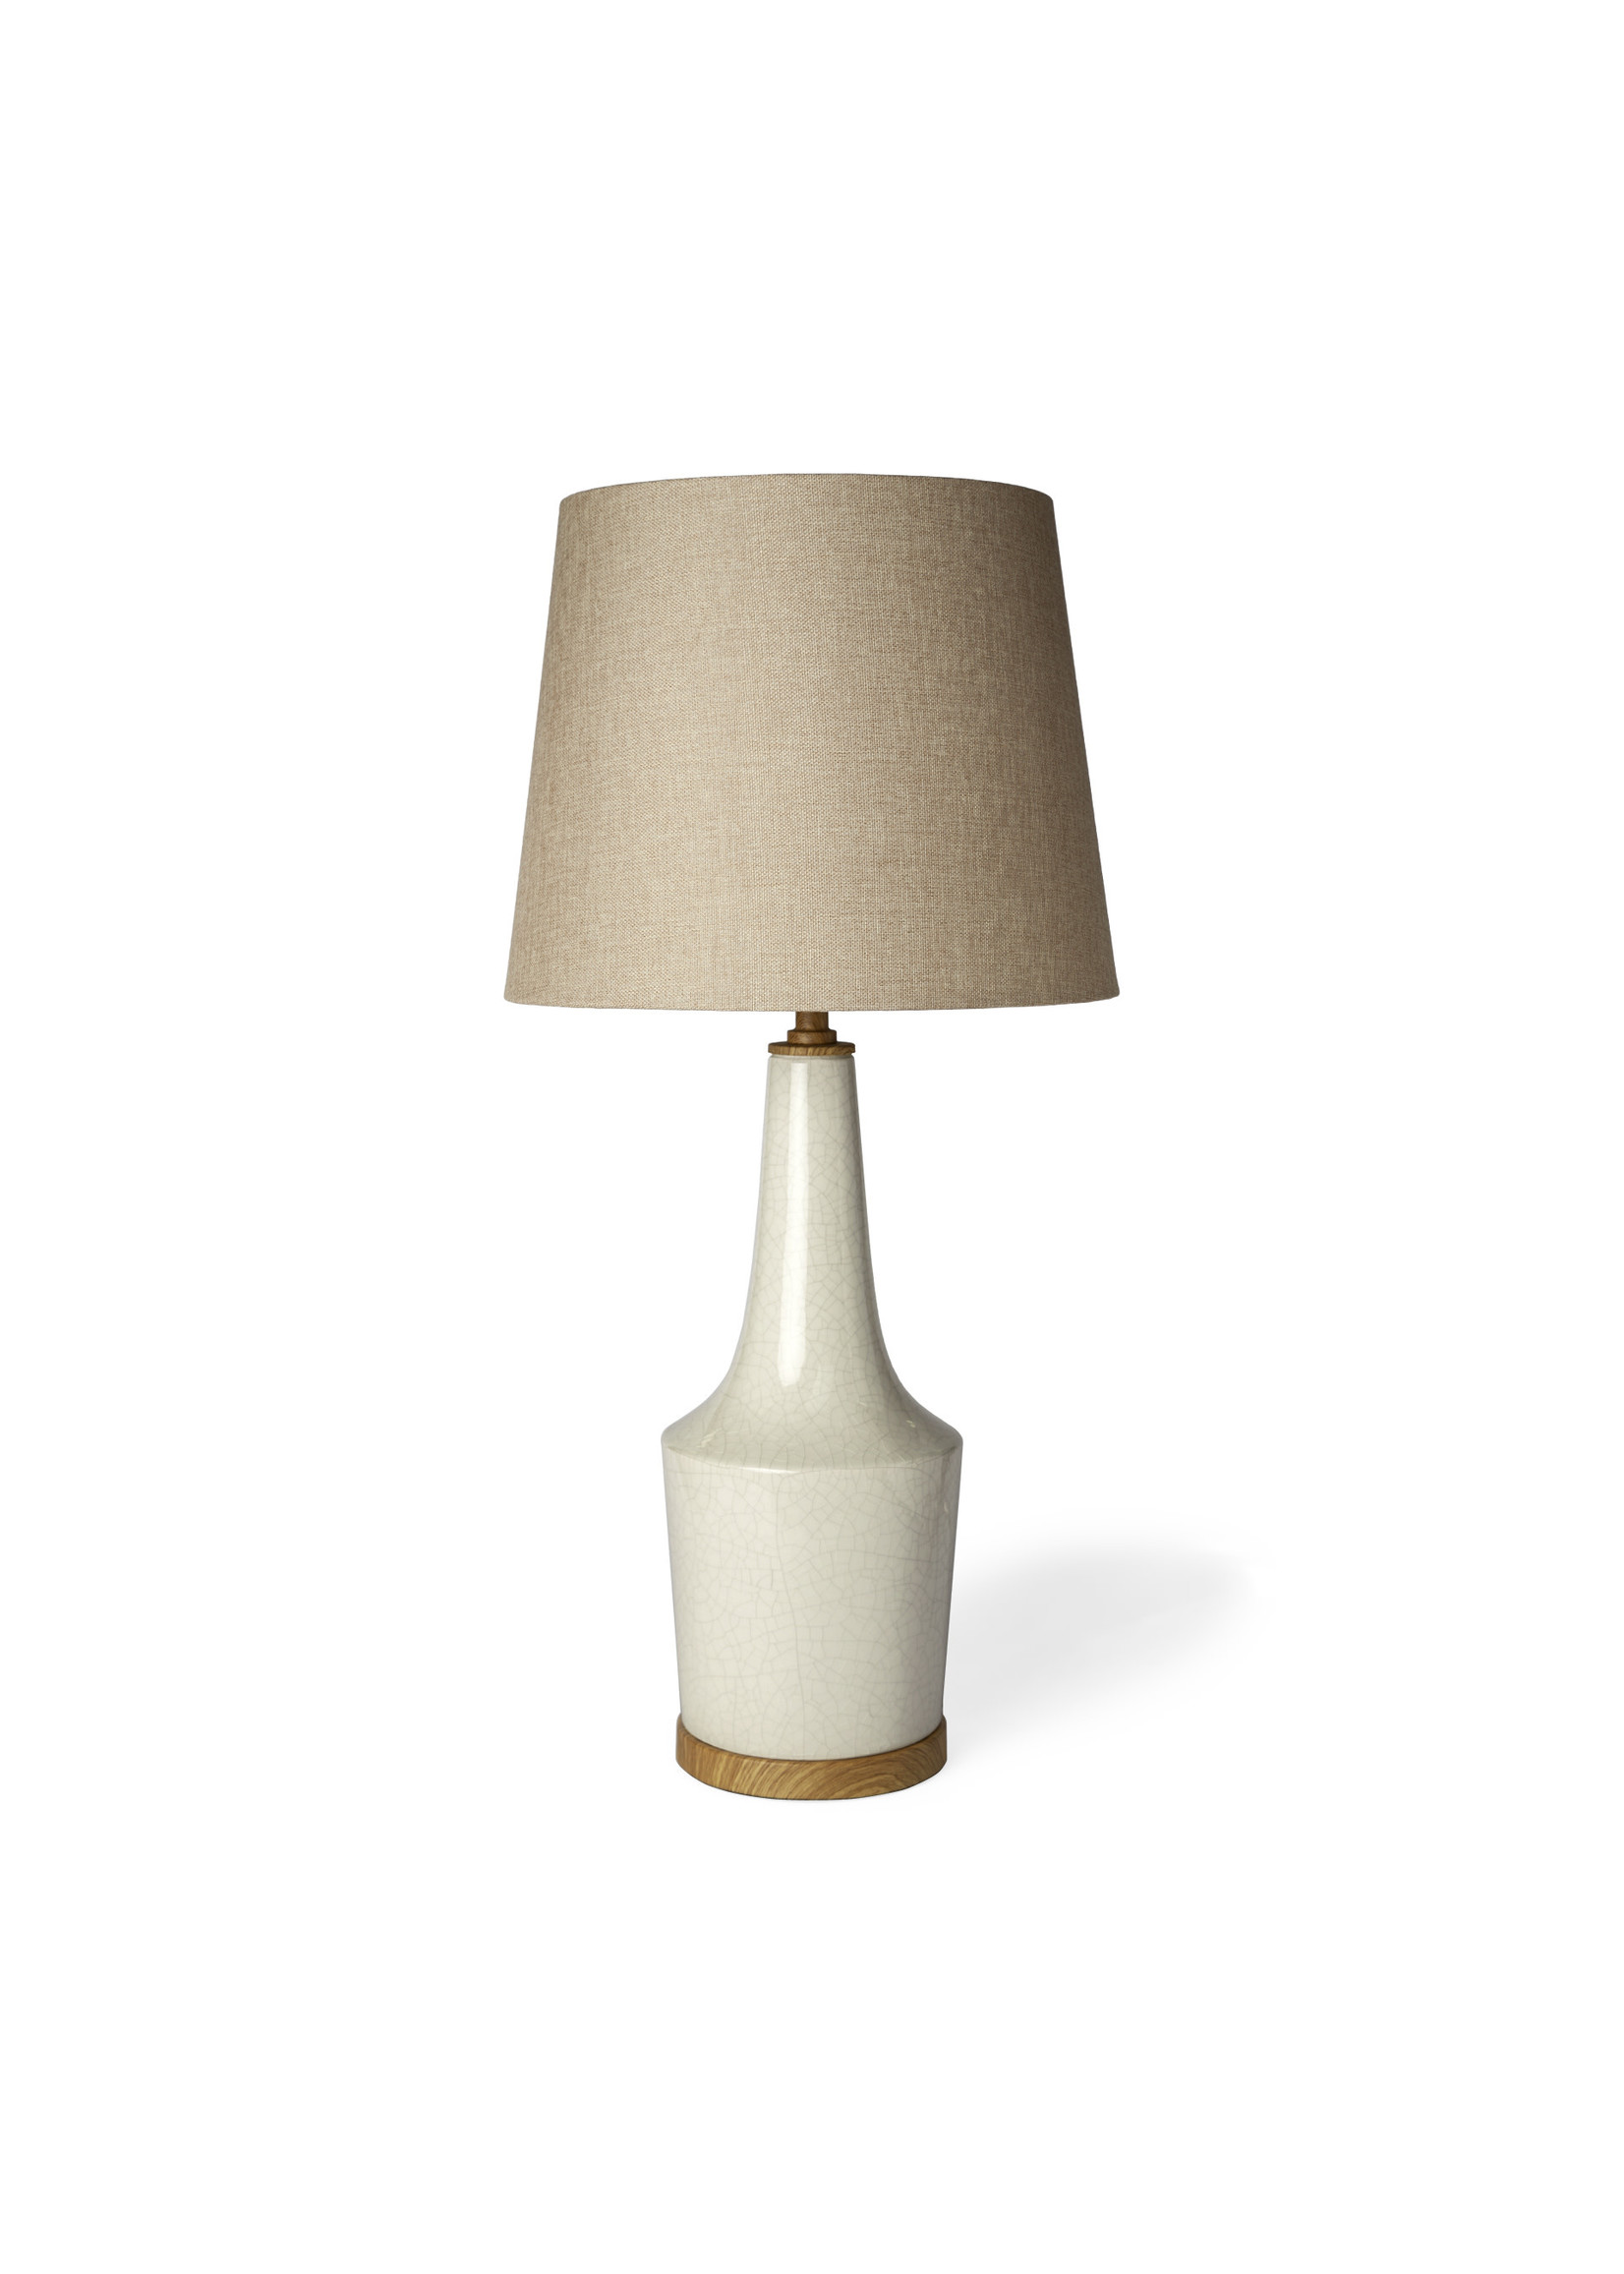 White Crackled Table Lamp